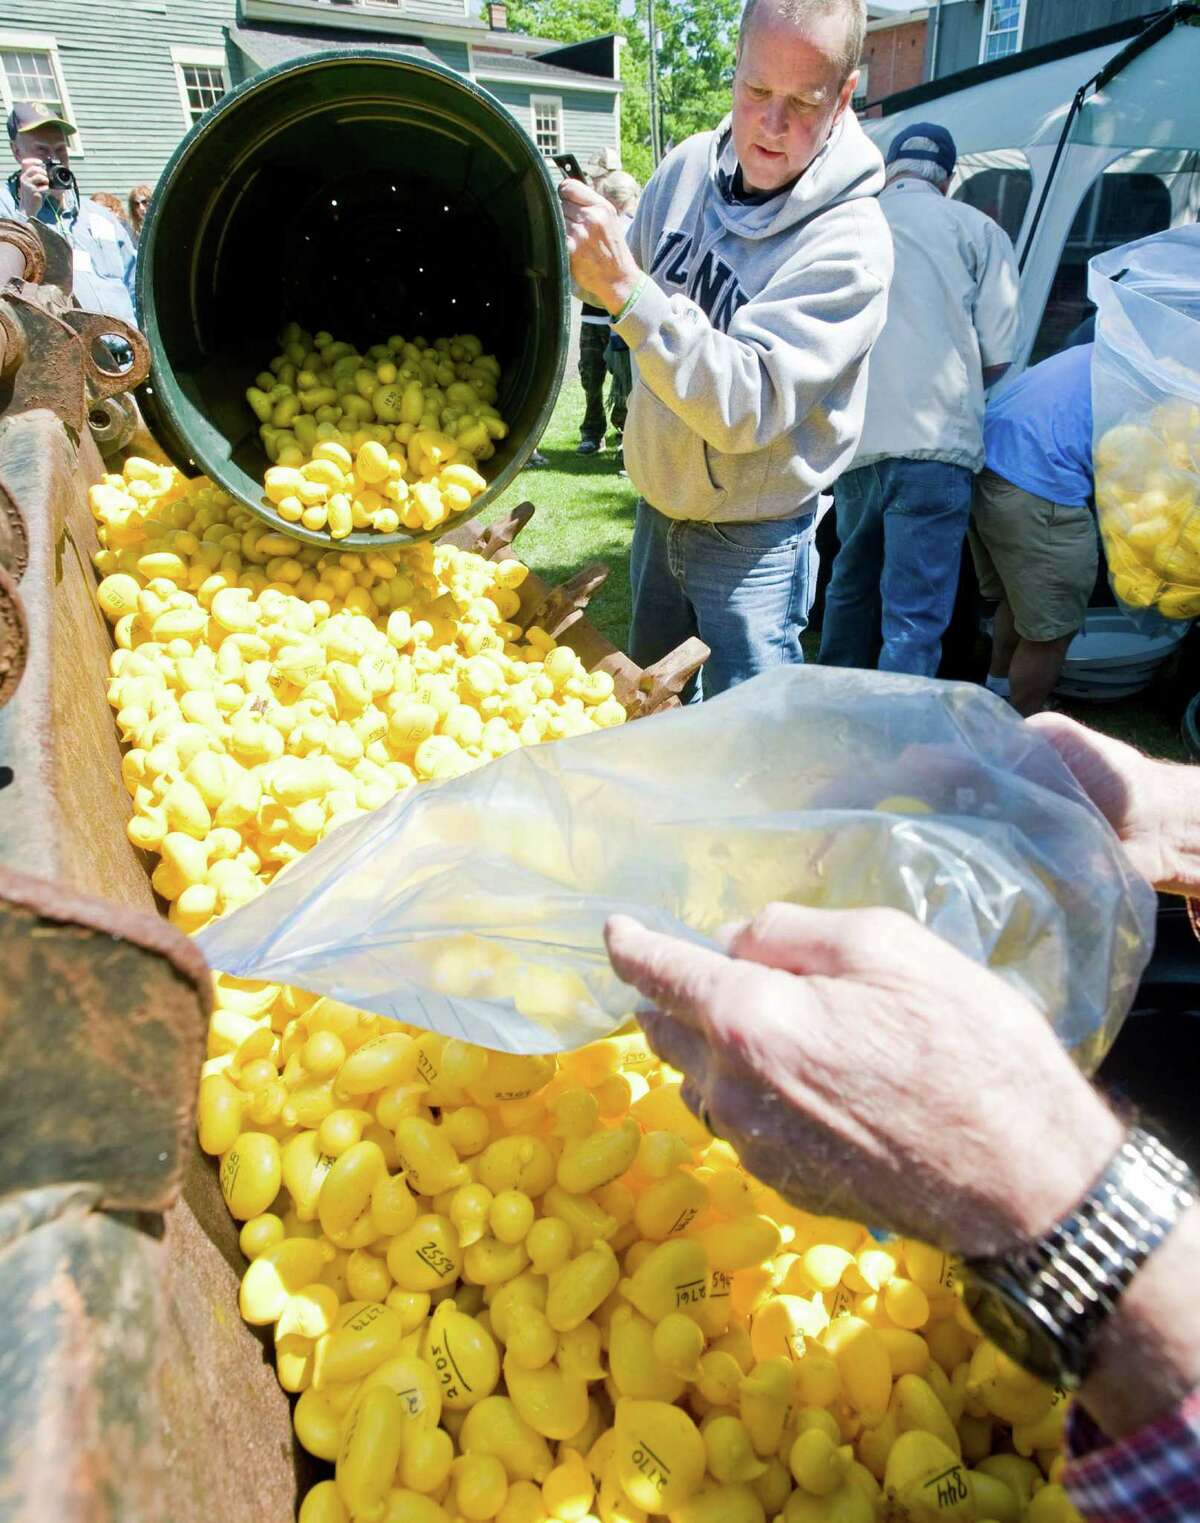 Newtown Lions Club Duck Race Committee member Doug Body pours some of the 3458 ducks into the bucket of a backhoe to be transported to the start of the Newtown Lions Club's 15th annual Great Pootatuck Duck Race in Sandy Hook. Saturday, May 23, 2015